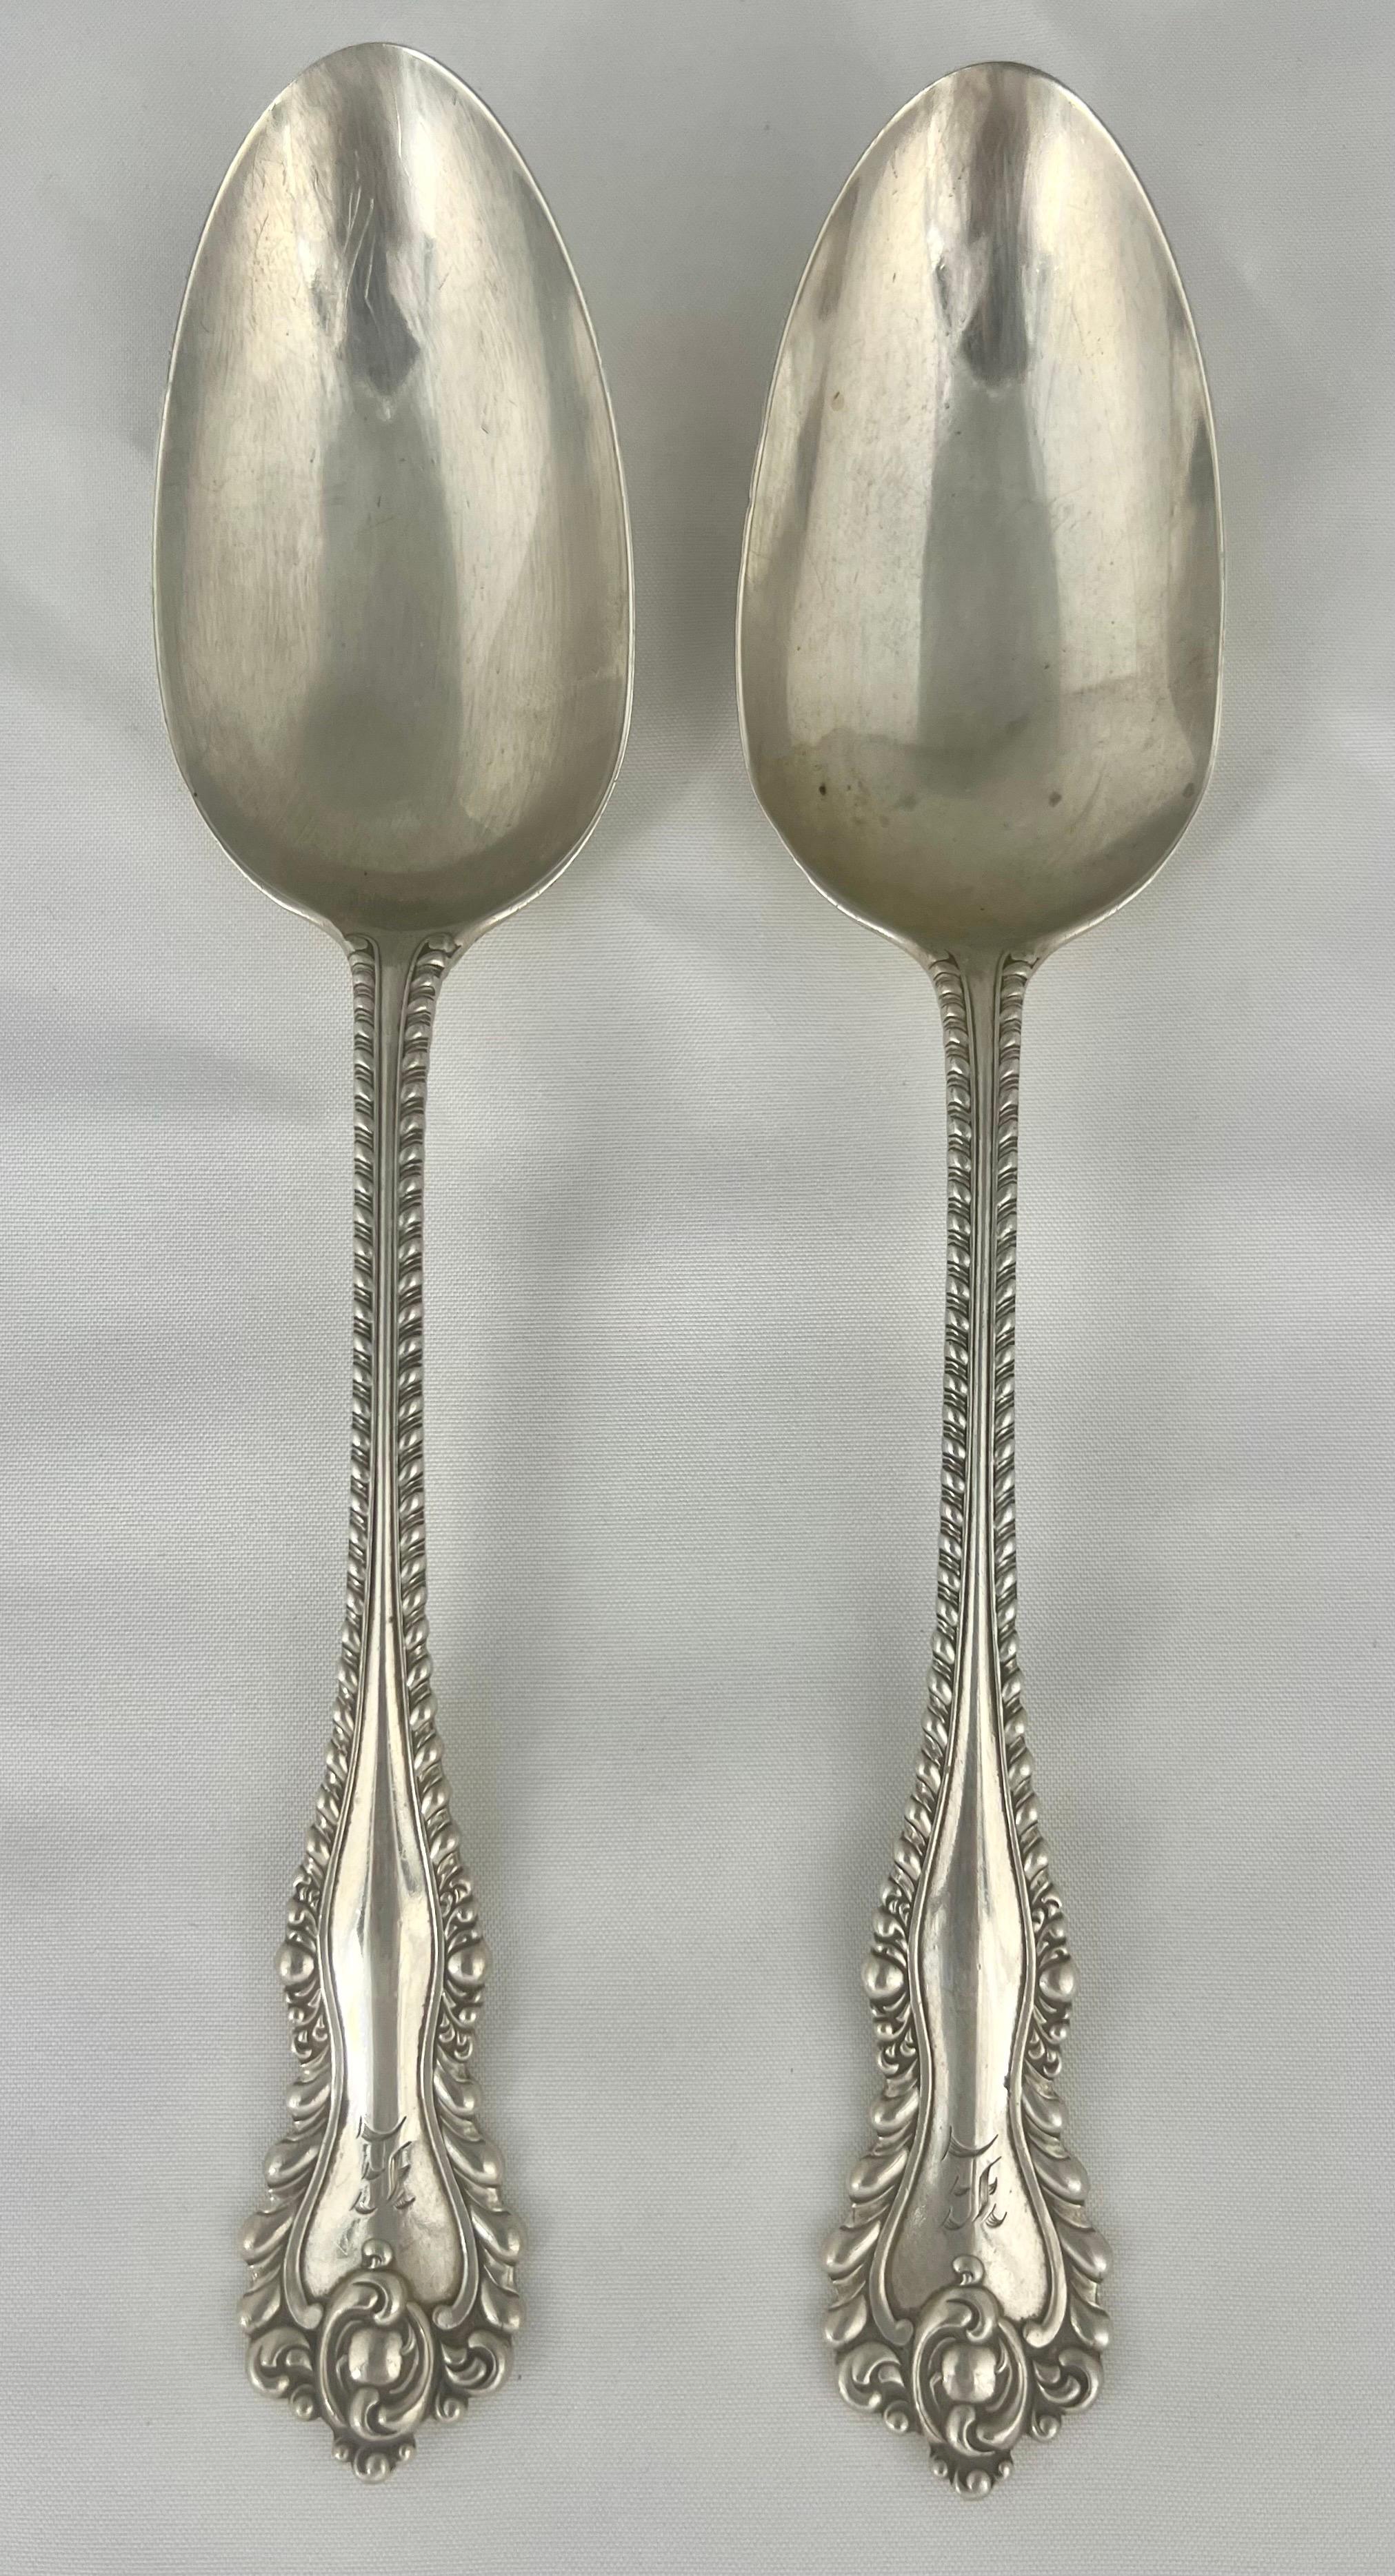 Pair of early 20th-century sterling silver serving spoons with an 